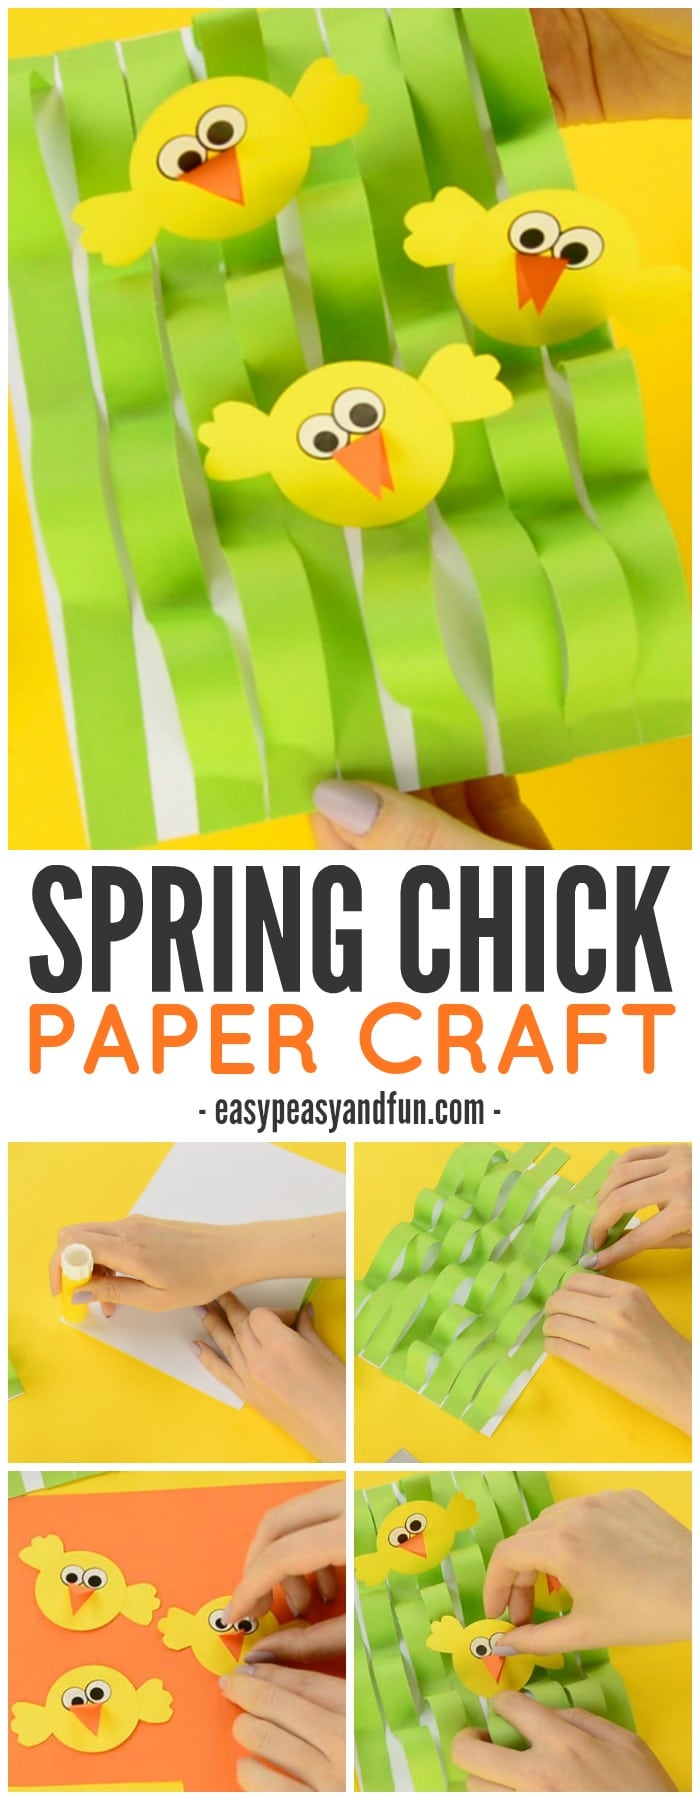 Adorable Spring Chick Paper Craft for Kids to Make